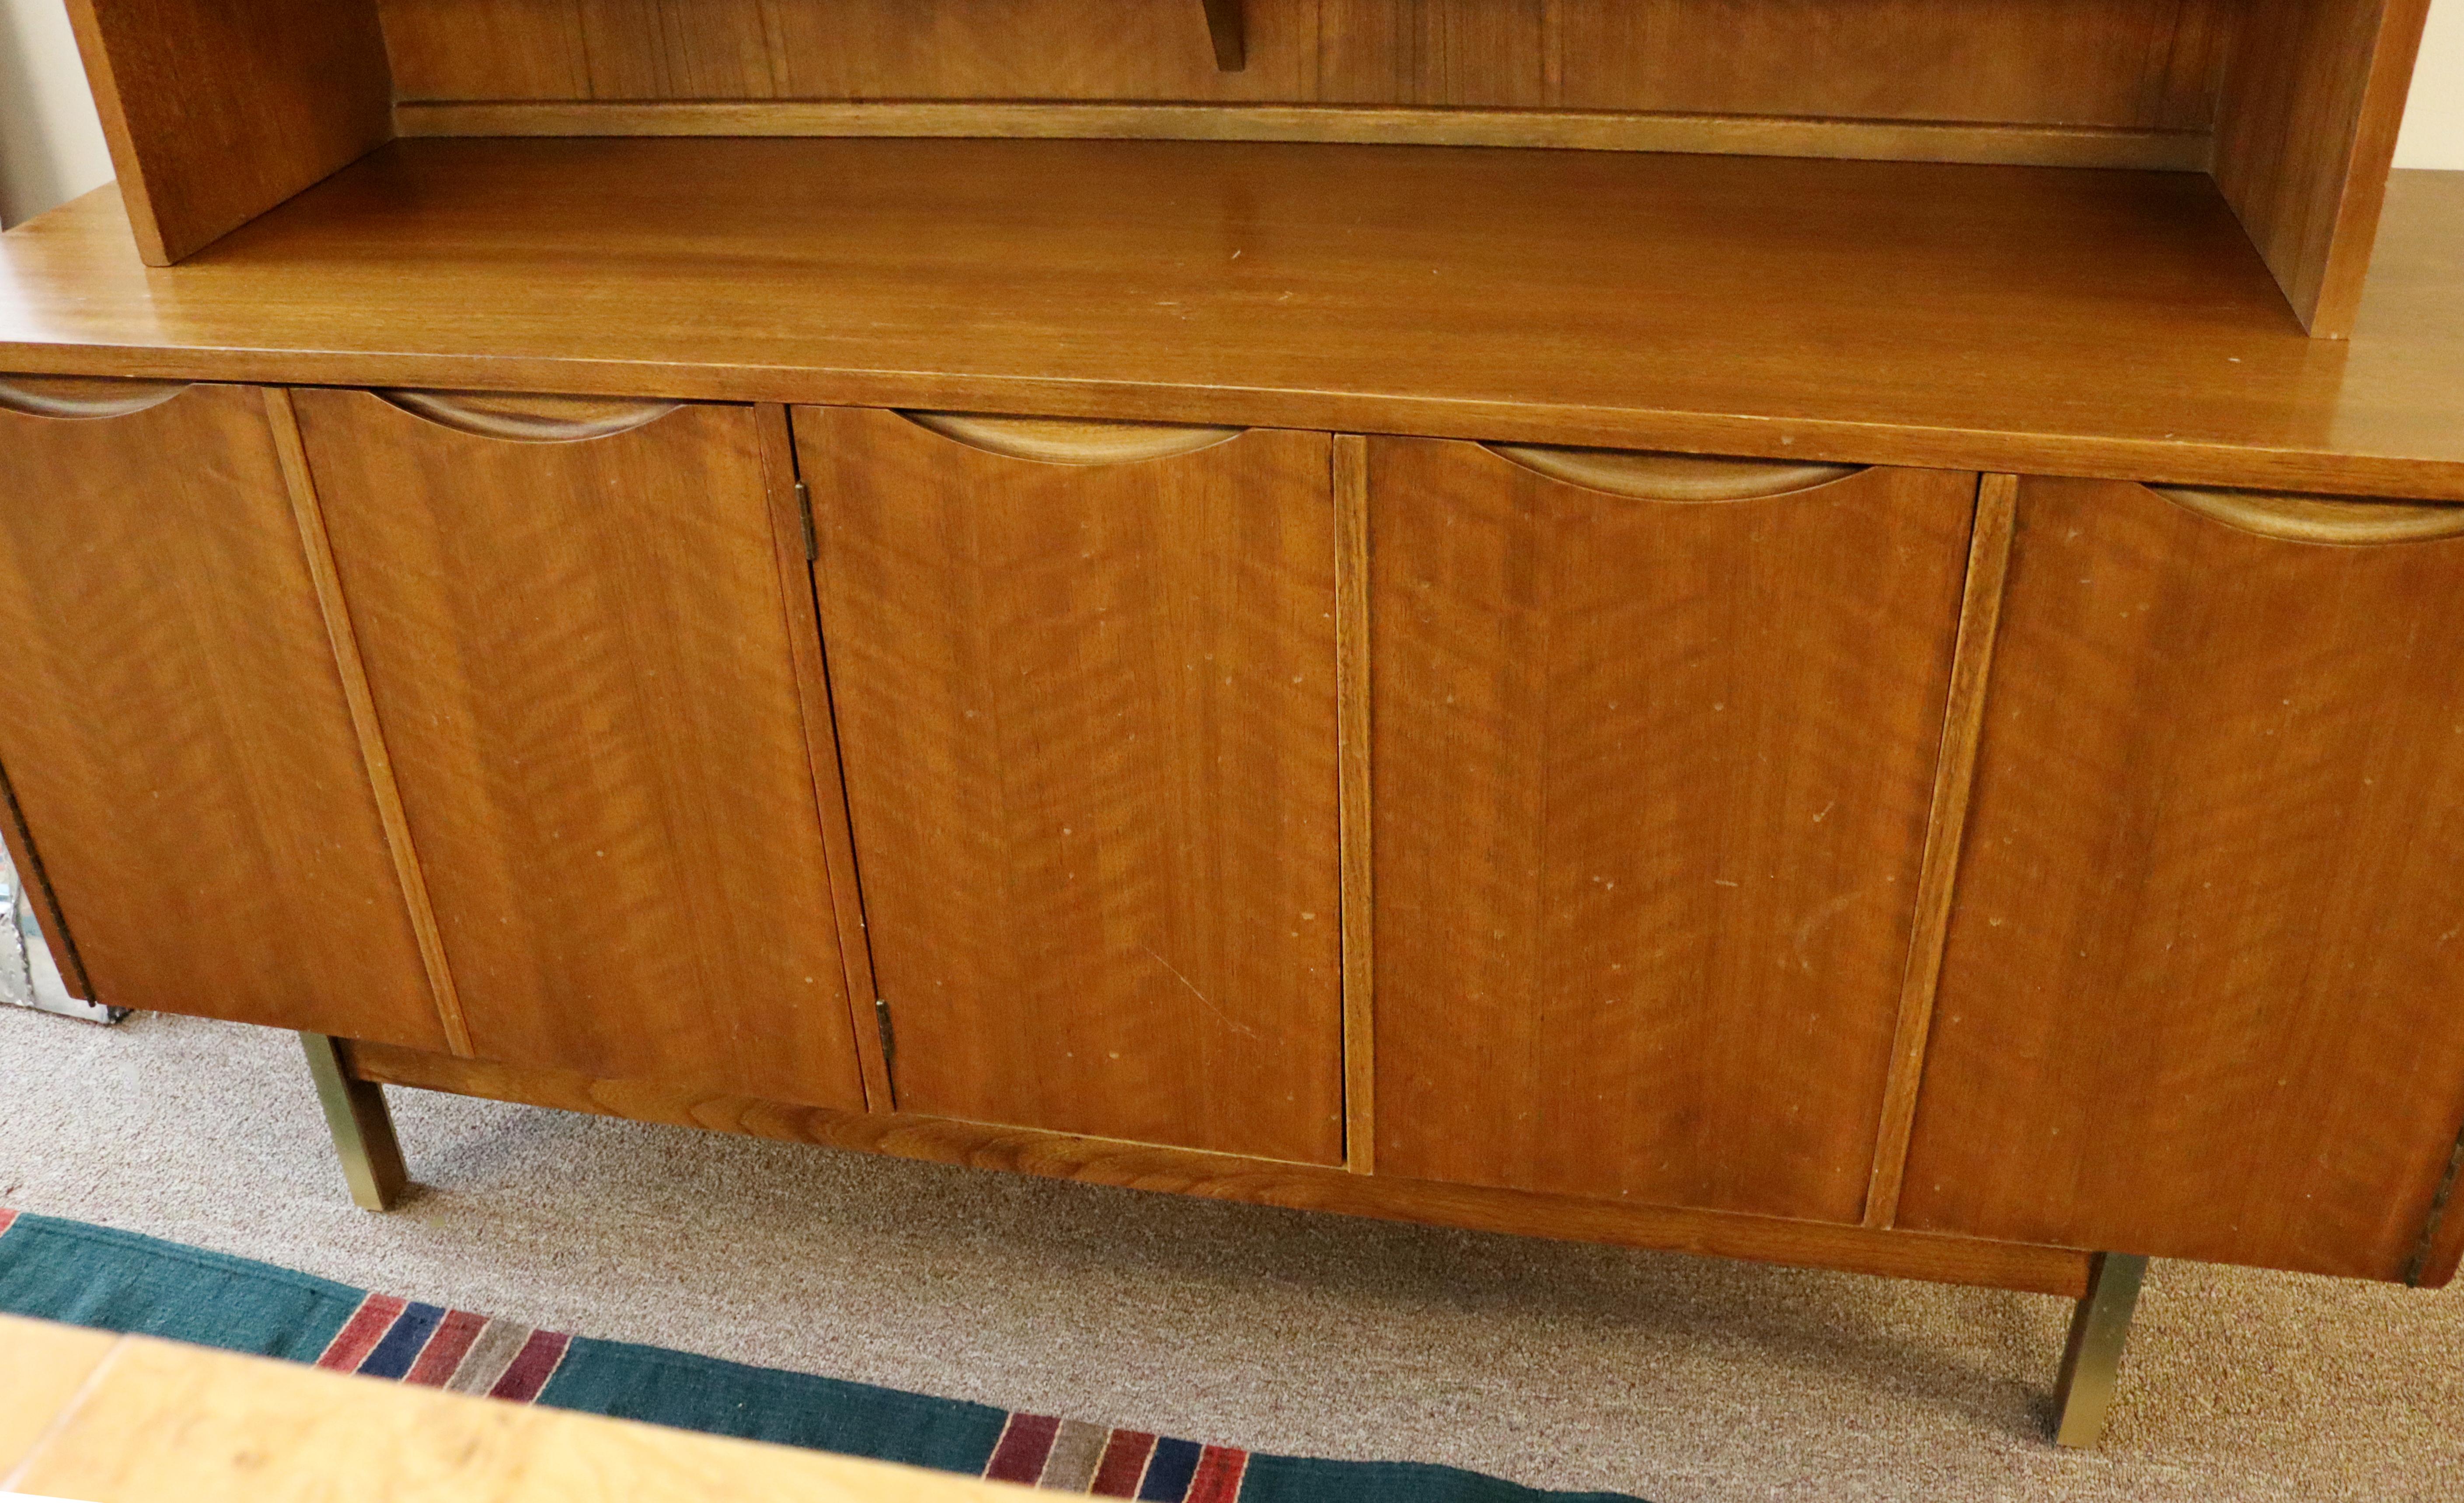 For your consideration is a magnificent, two piece, walnut wood credenza, and a hutch with sliding glass doors, by American of Martinsville, circa the 1960s. In excellent vintage condition. The dimensions are 64